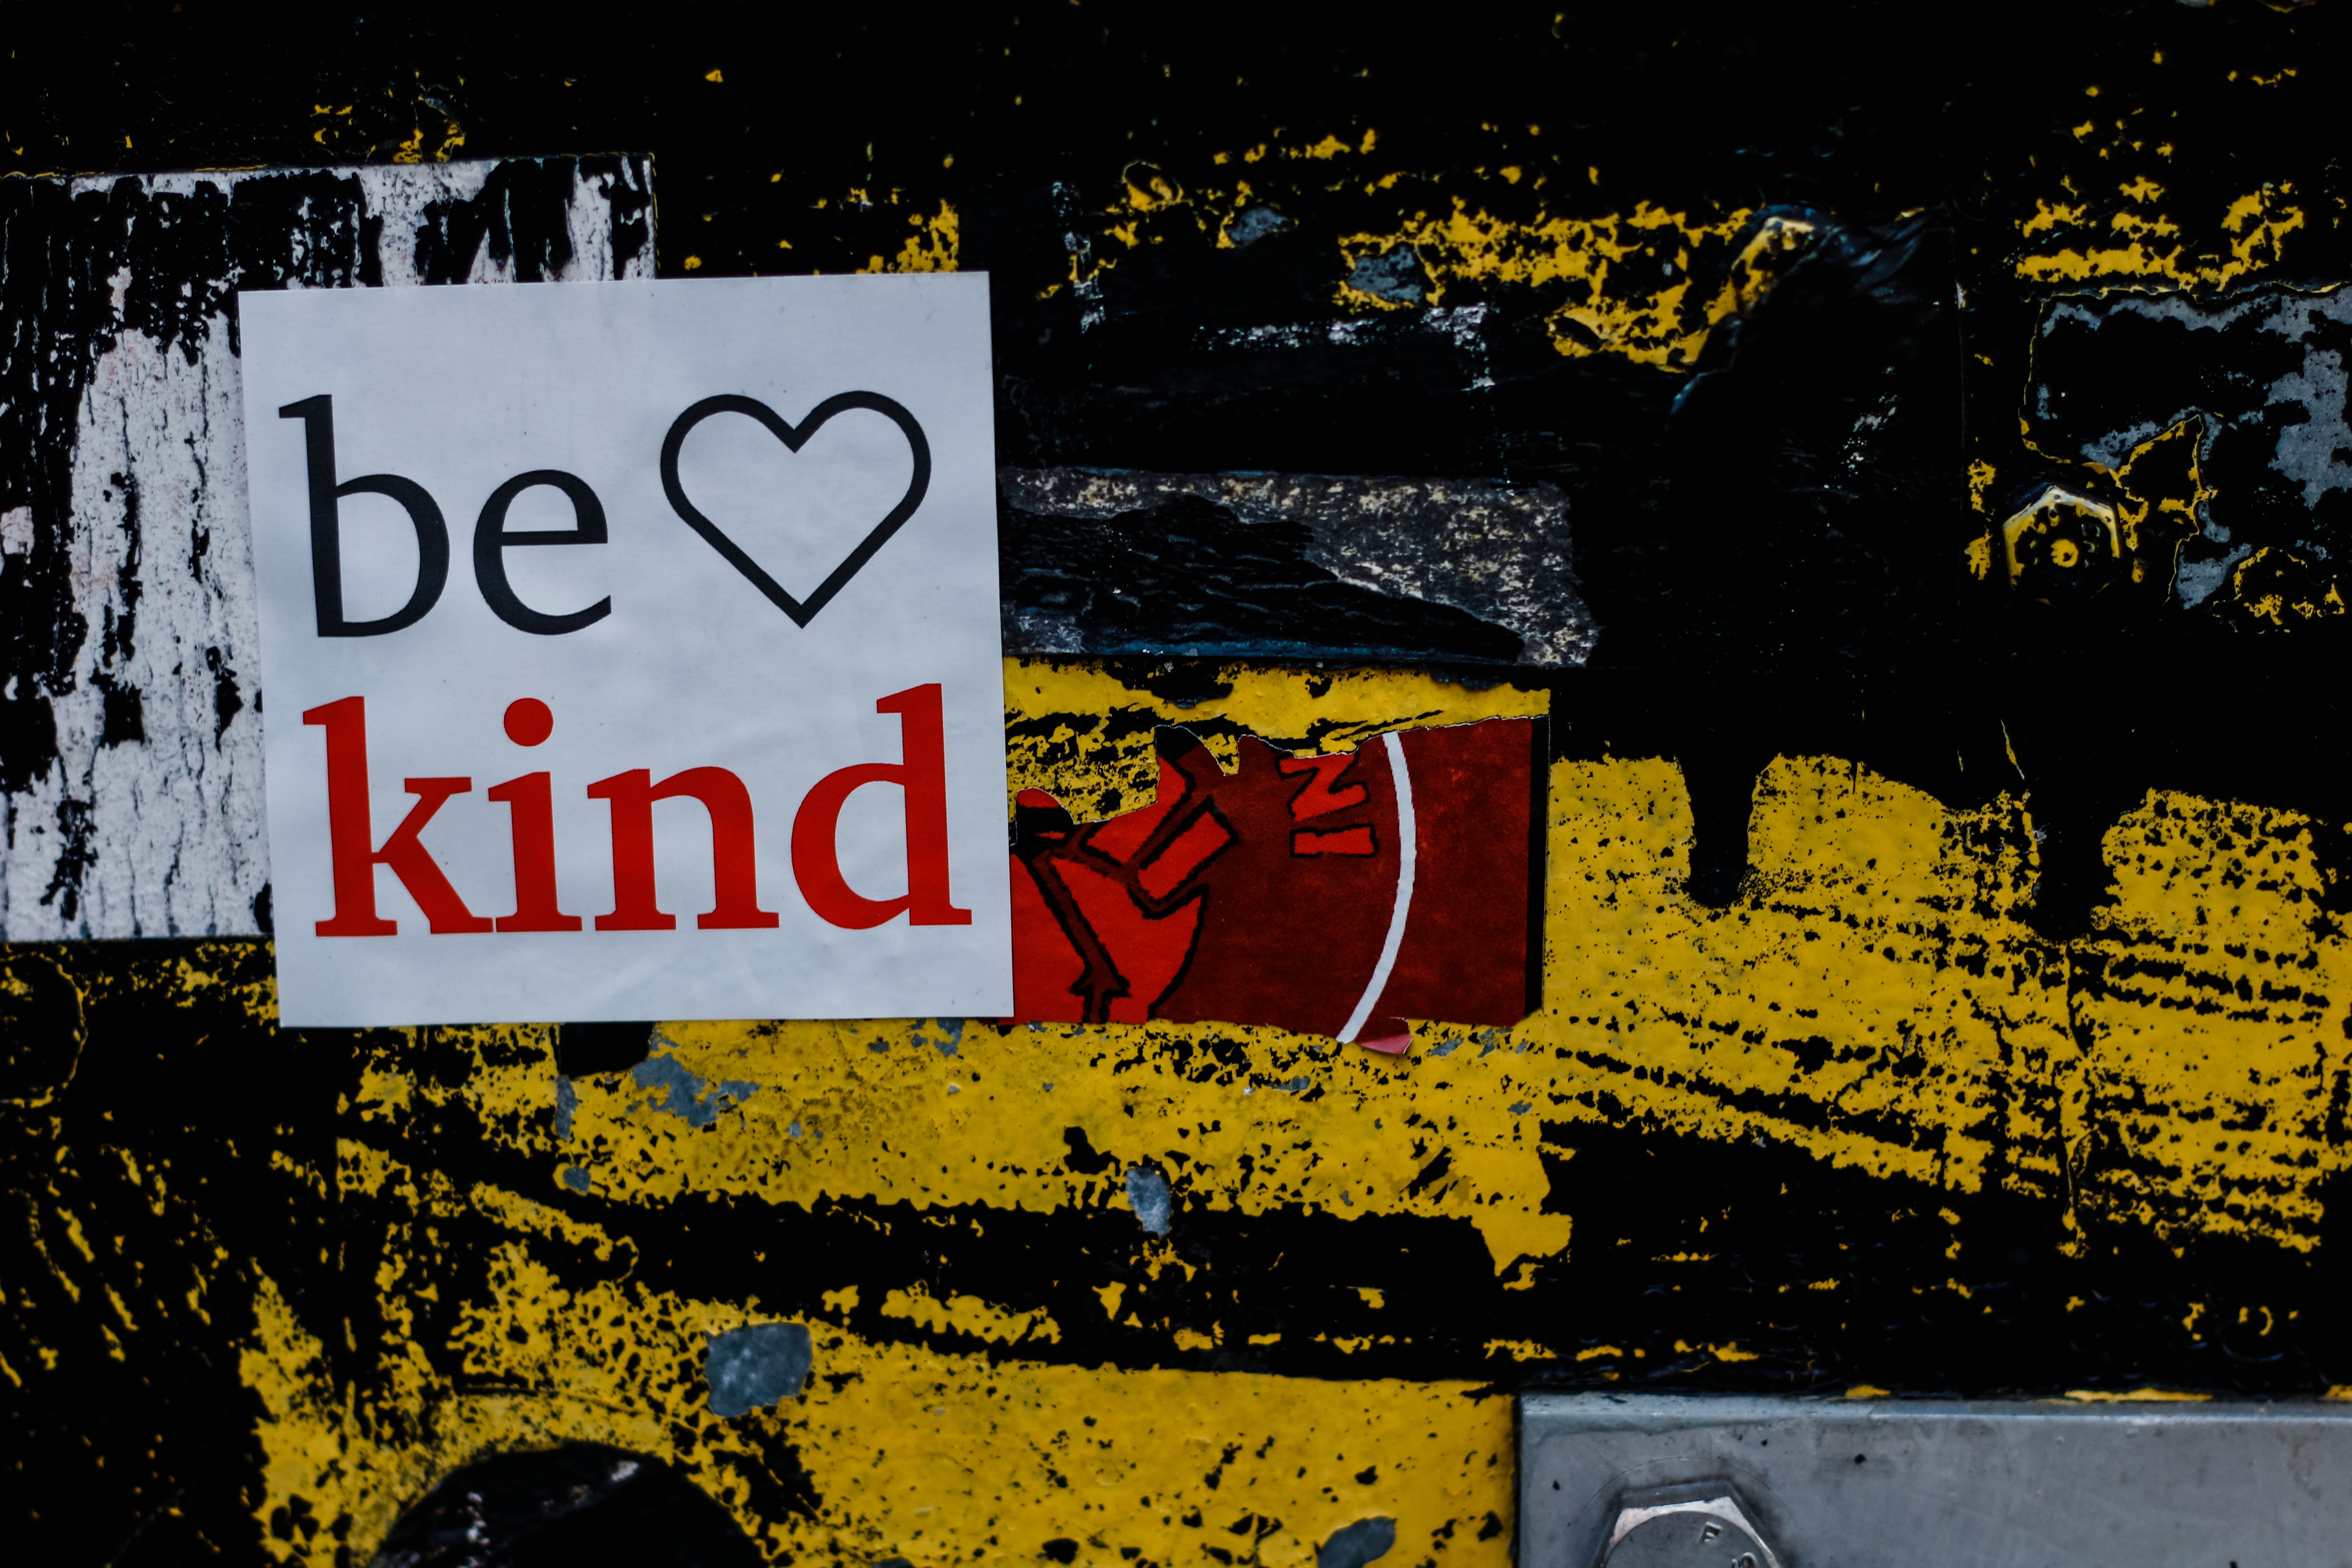 sticker on a wall that says: be kind